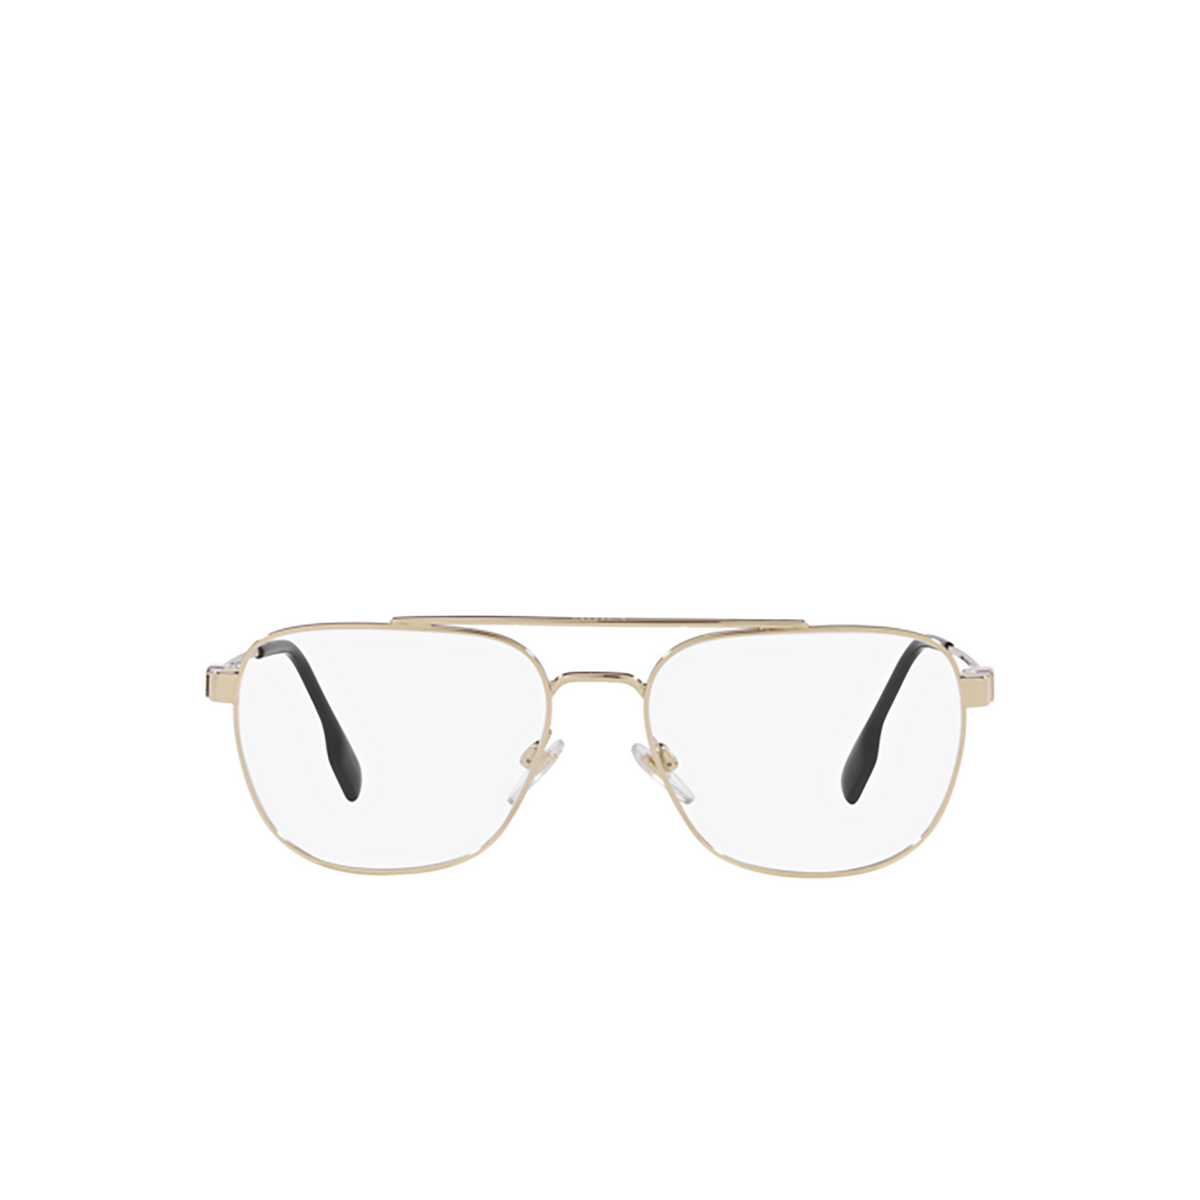 Burberry MICHAEL Eyeglasses 1109 Light Gold - front view